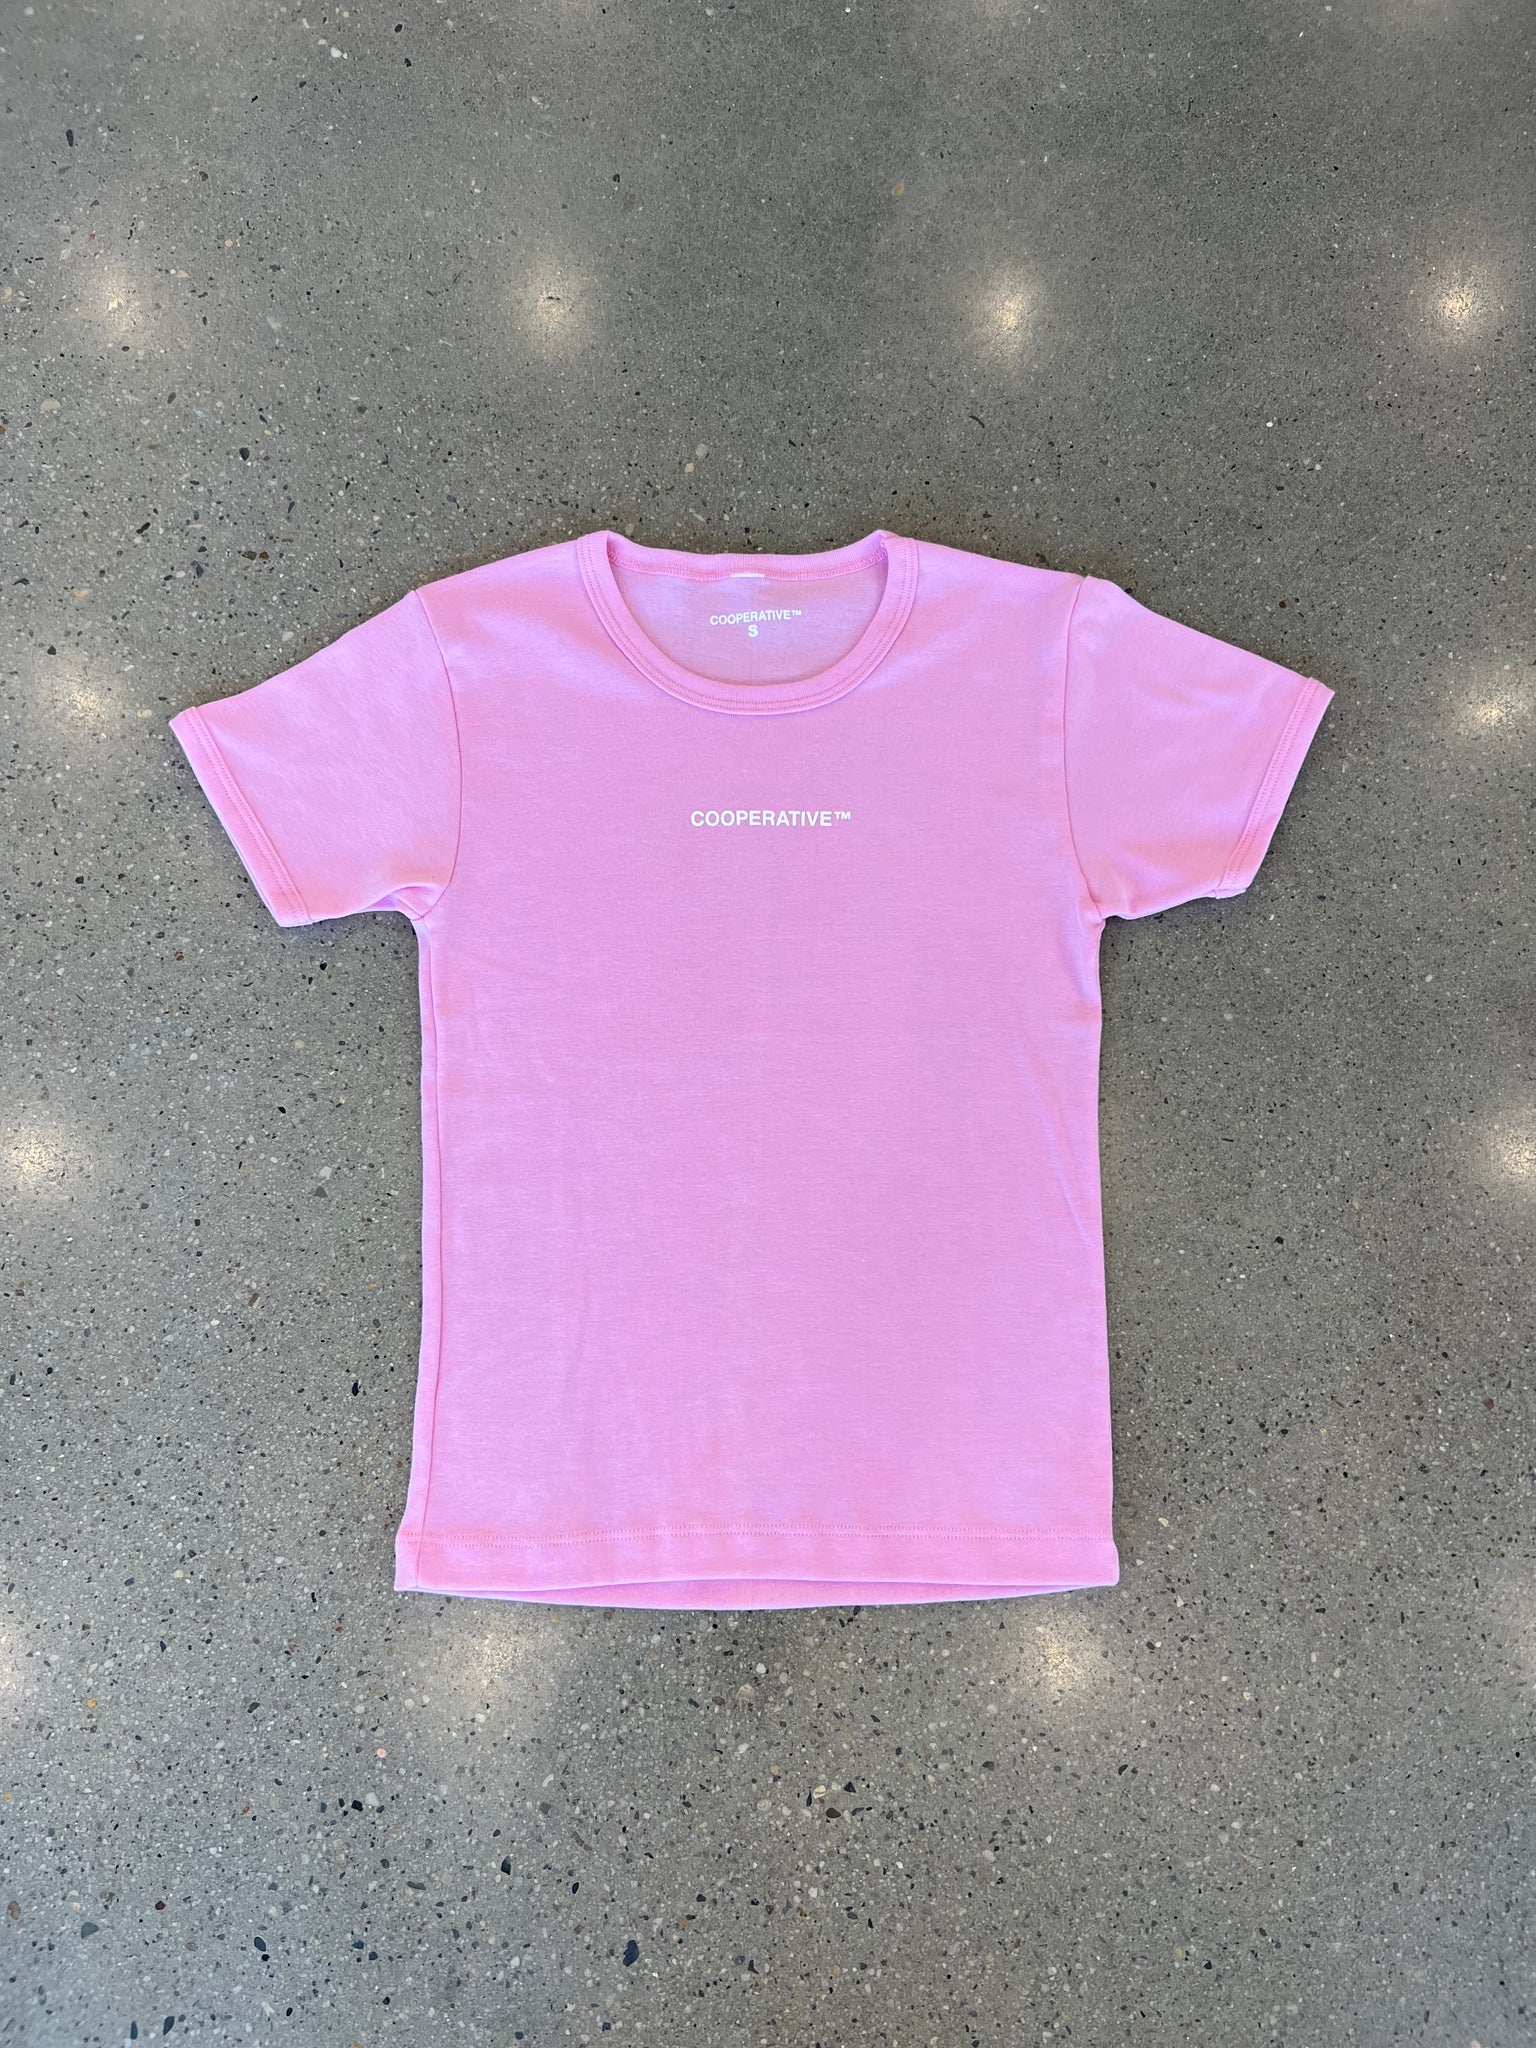 Cooperative Womans Logo Tee Pink